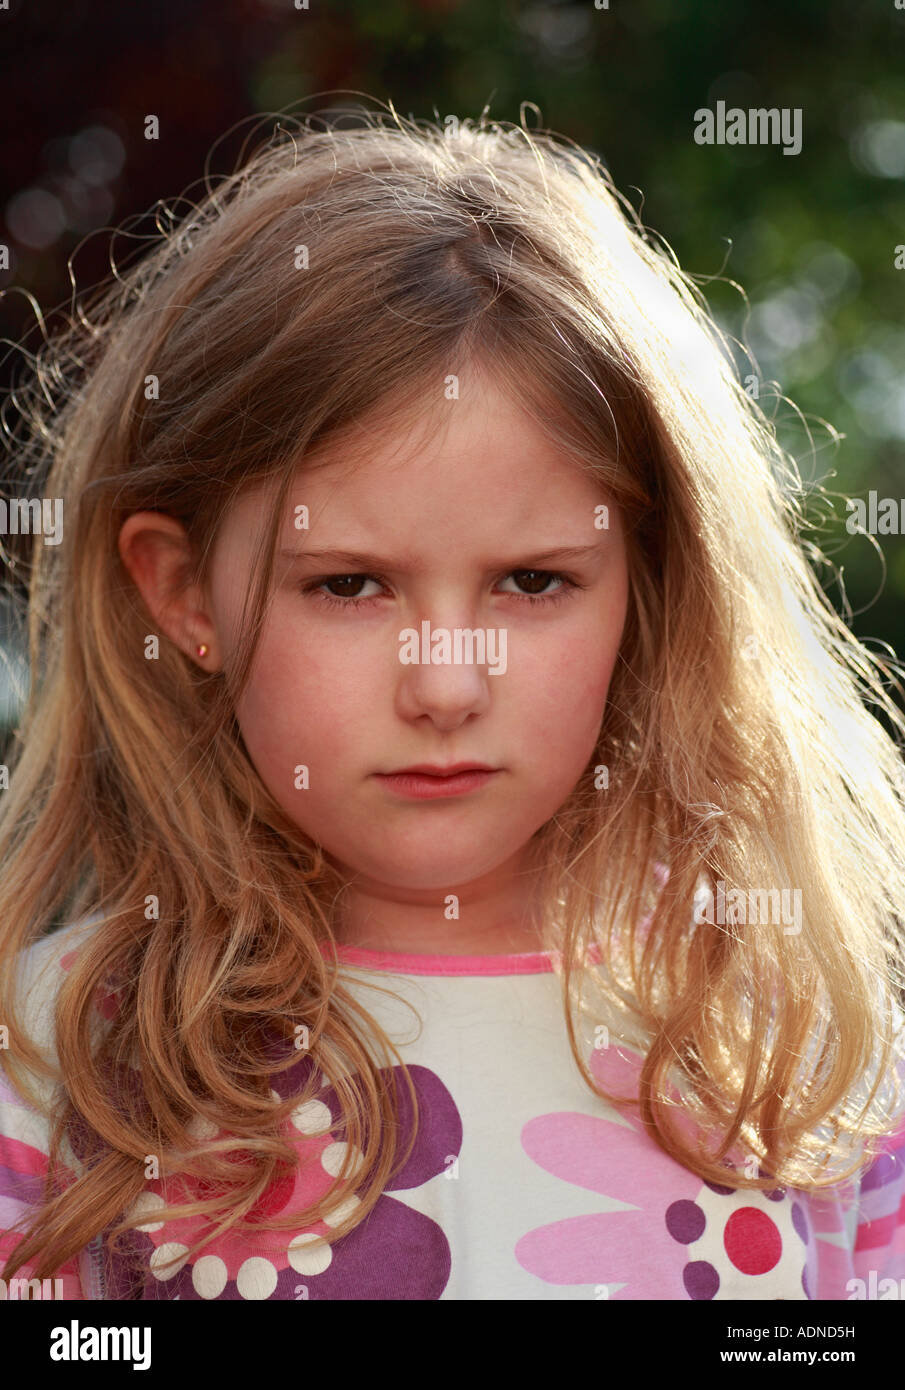 Head and shoulders shot of a seven year old girl frowning, in a bad mood or sulking. Stock Photo